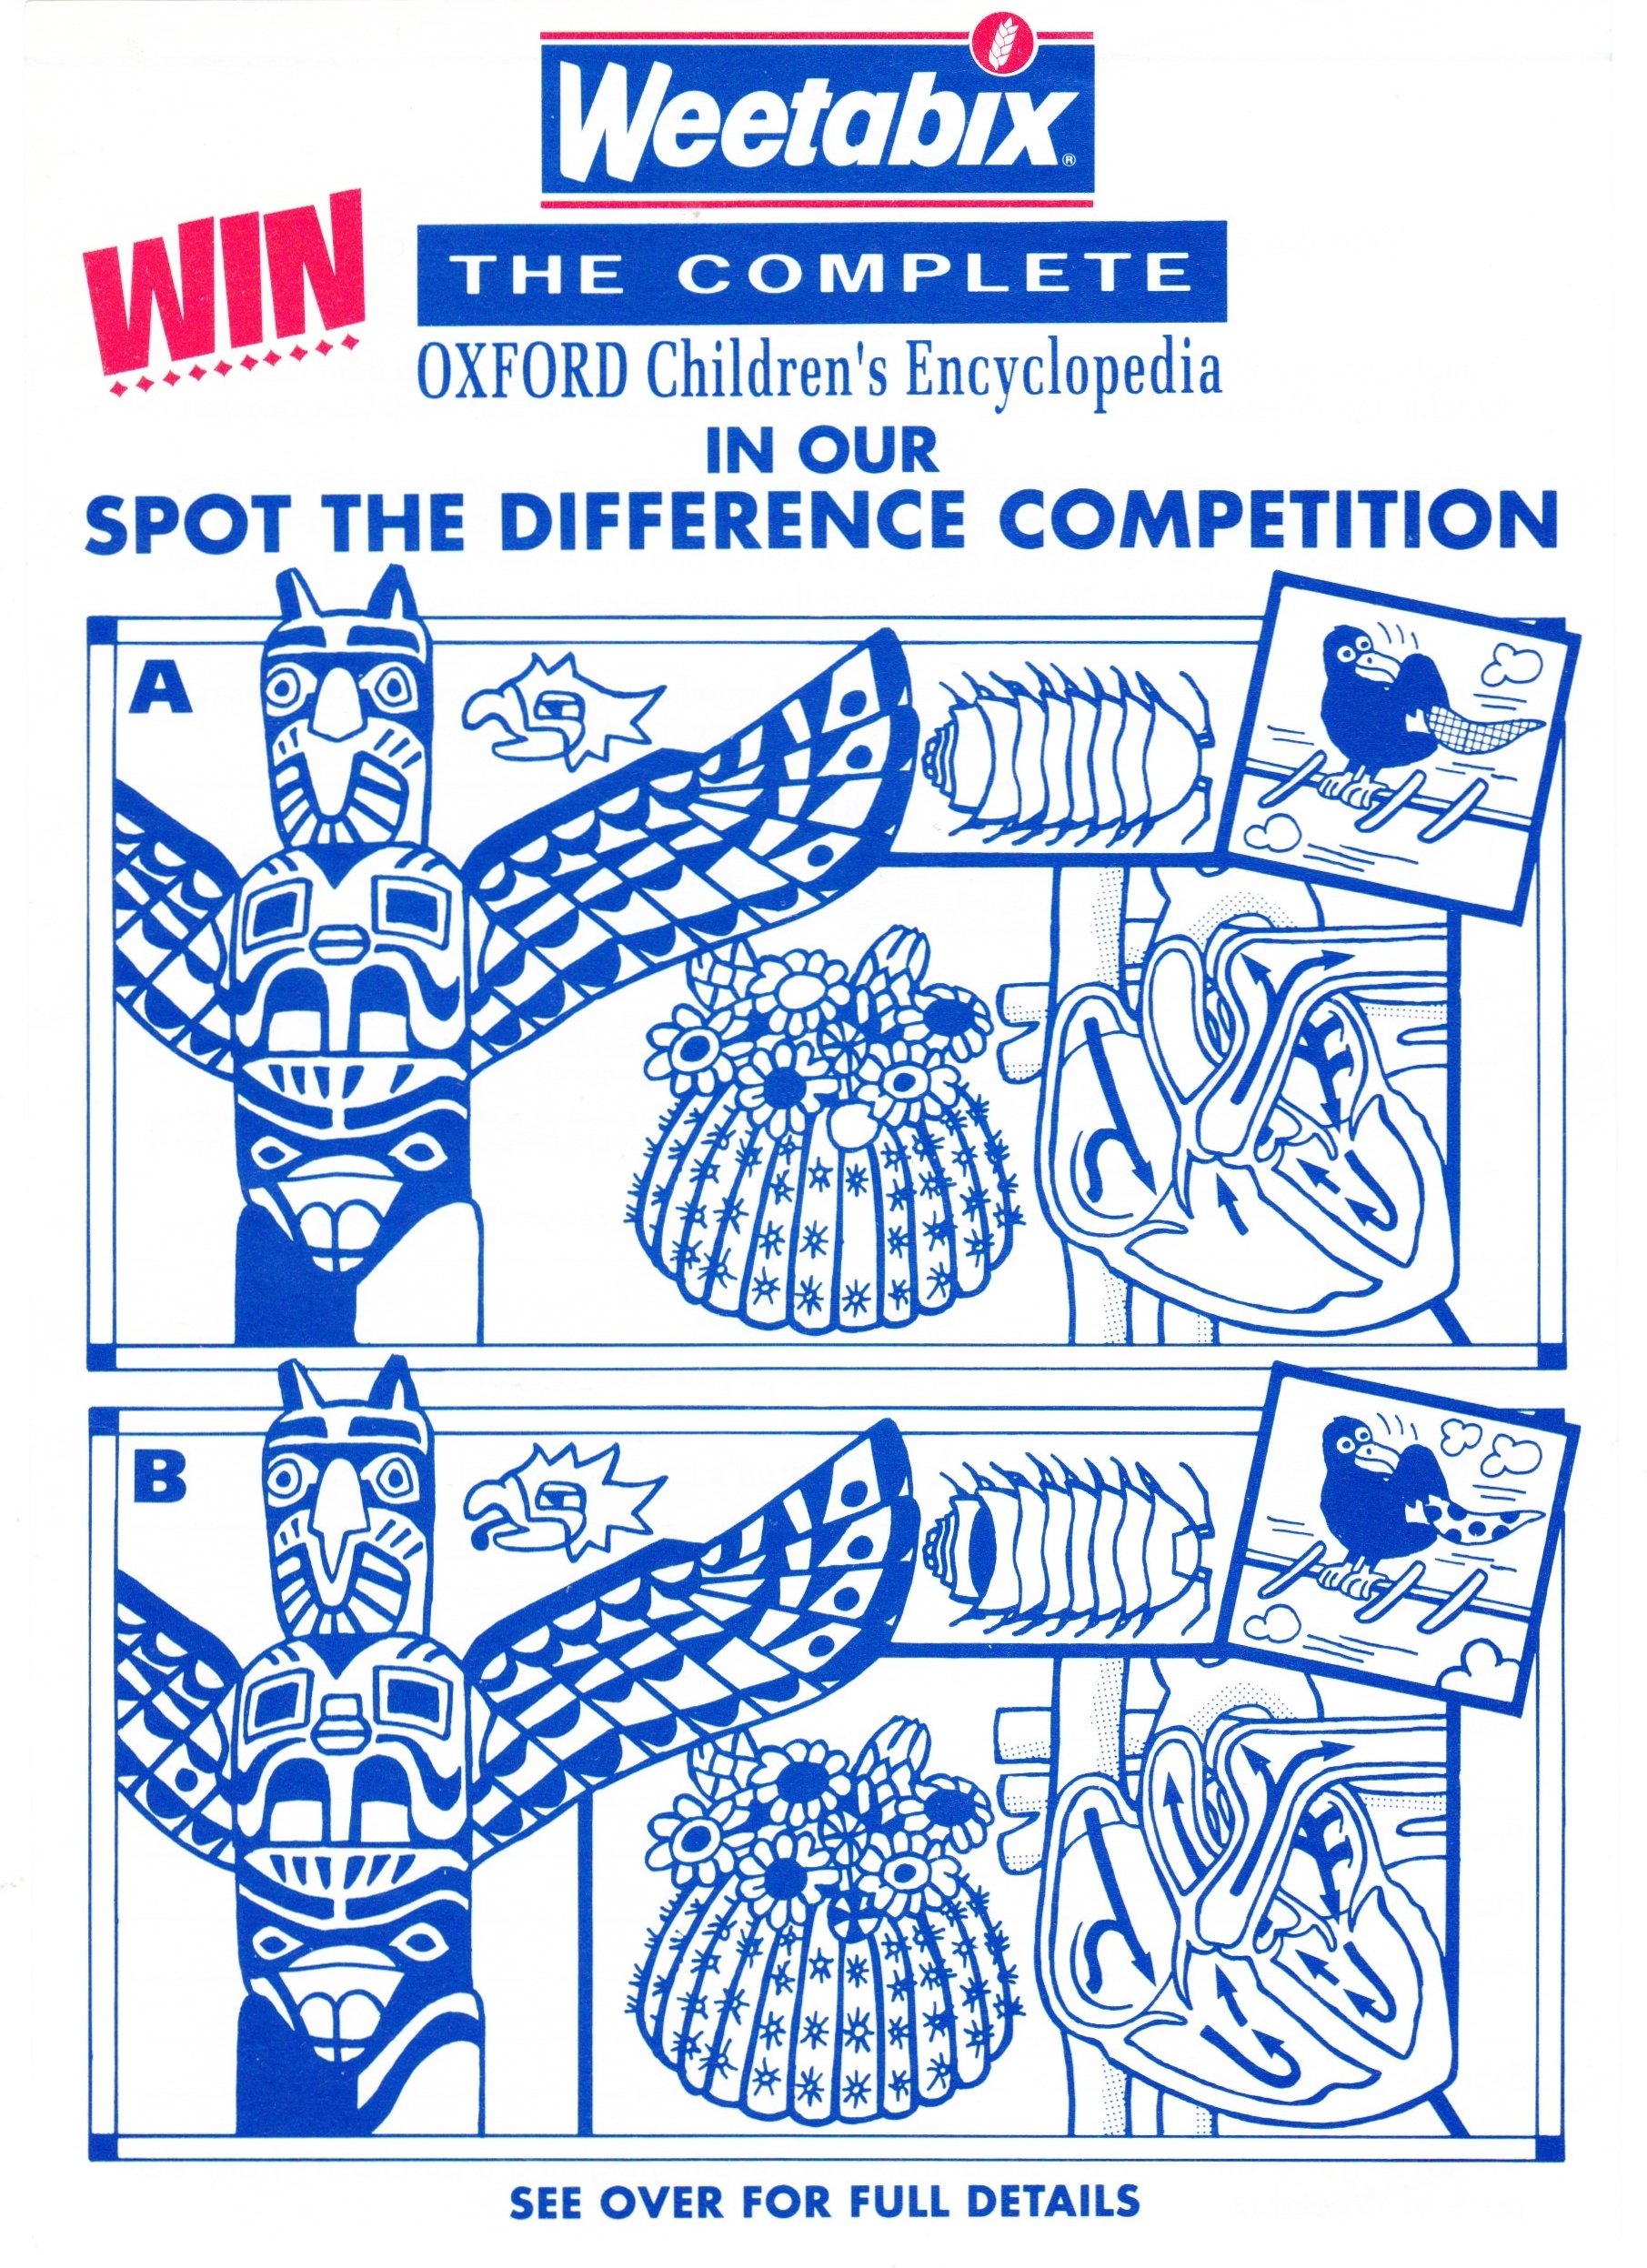 1997 Weetabix Dictionary Competition (2)